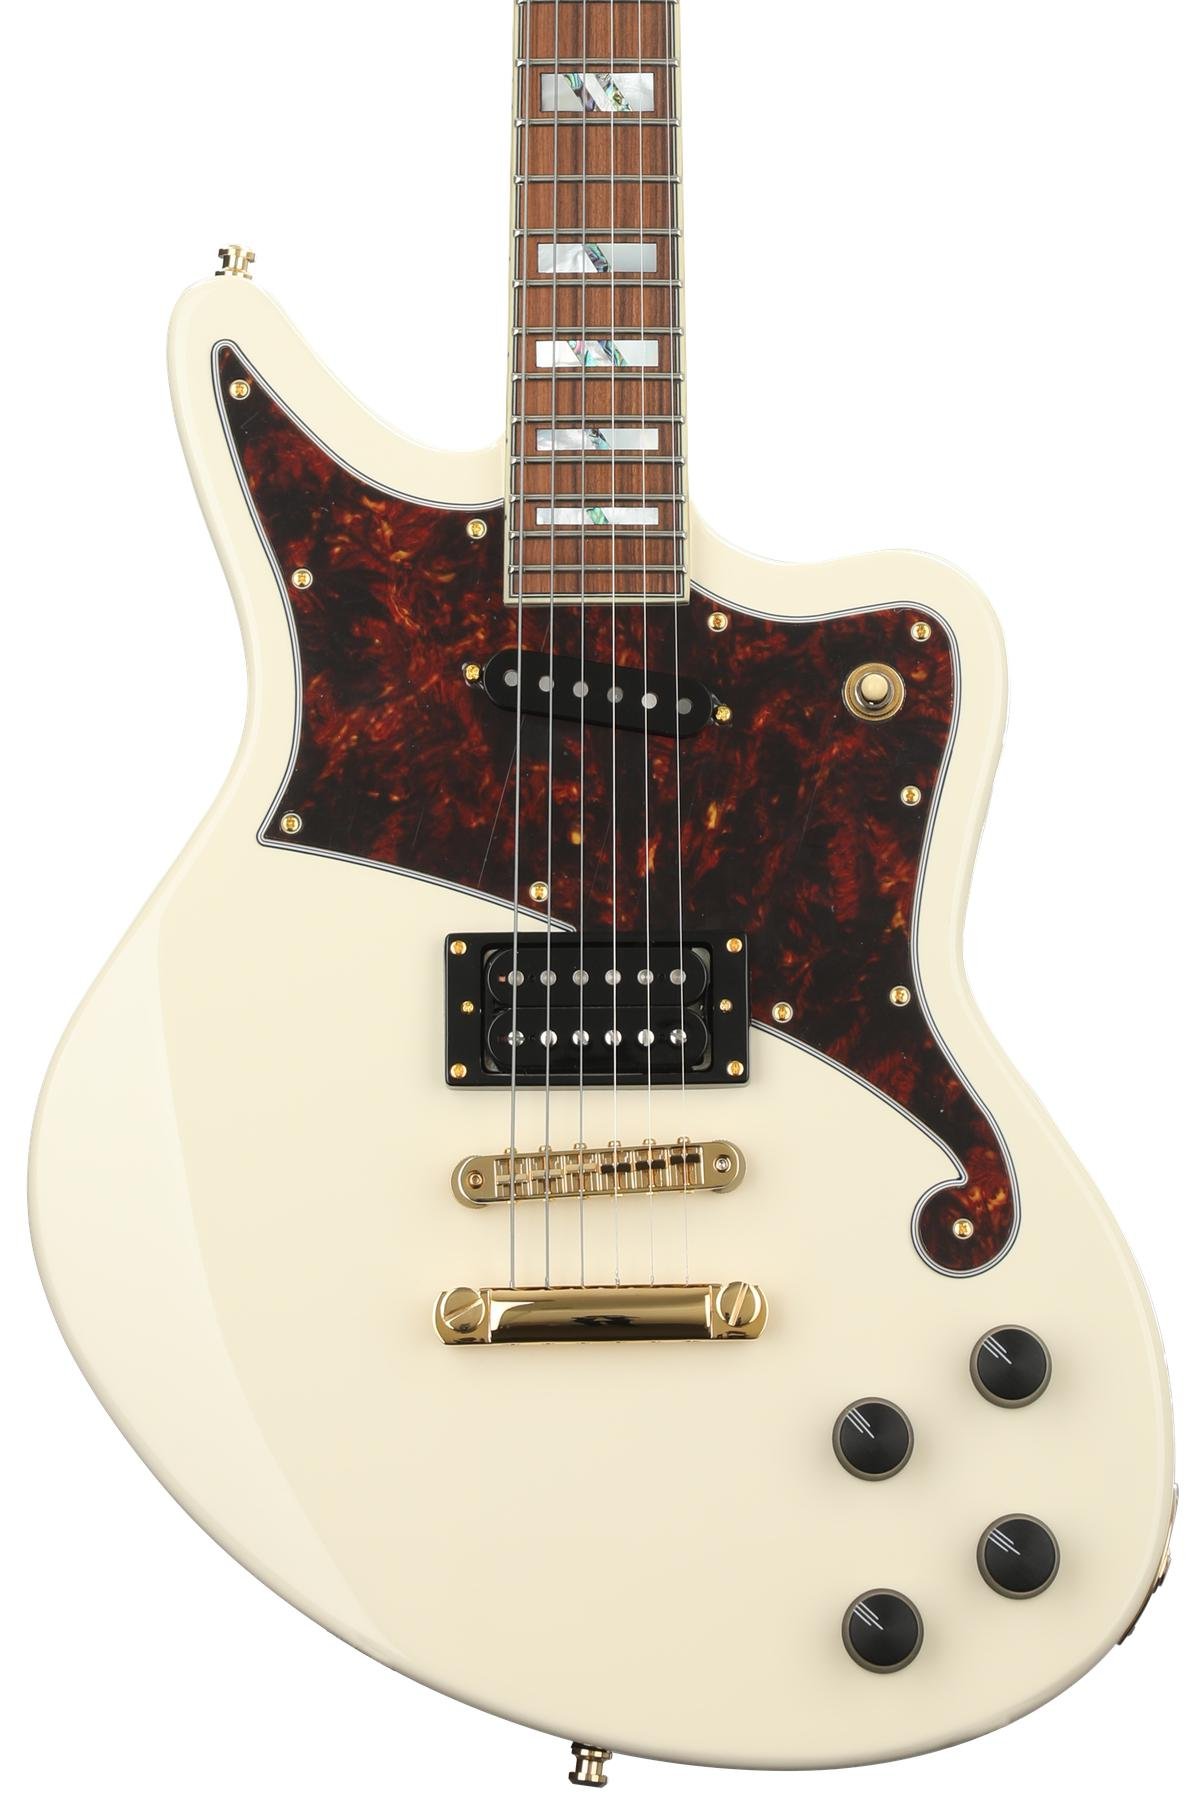 D'Angelico Deluxe Bedford - Vintage White | Sweetwater